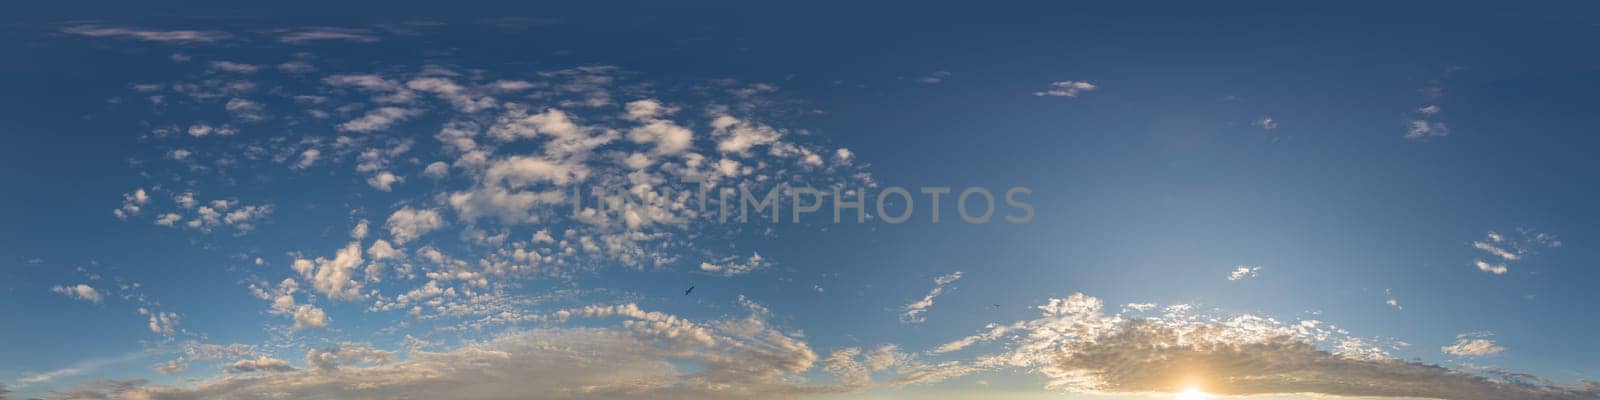 Blue summer sky panorama with light Cirrus clouds. Hdr seamless spherical equirectangular 360 panorama. Sky dome or zenith for 3D visualization and sky replacement for aerial drone 360 panoramas. by panophotograph